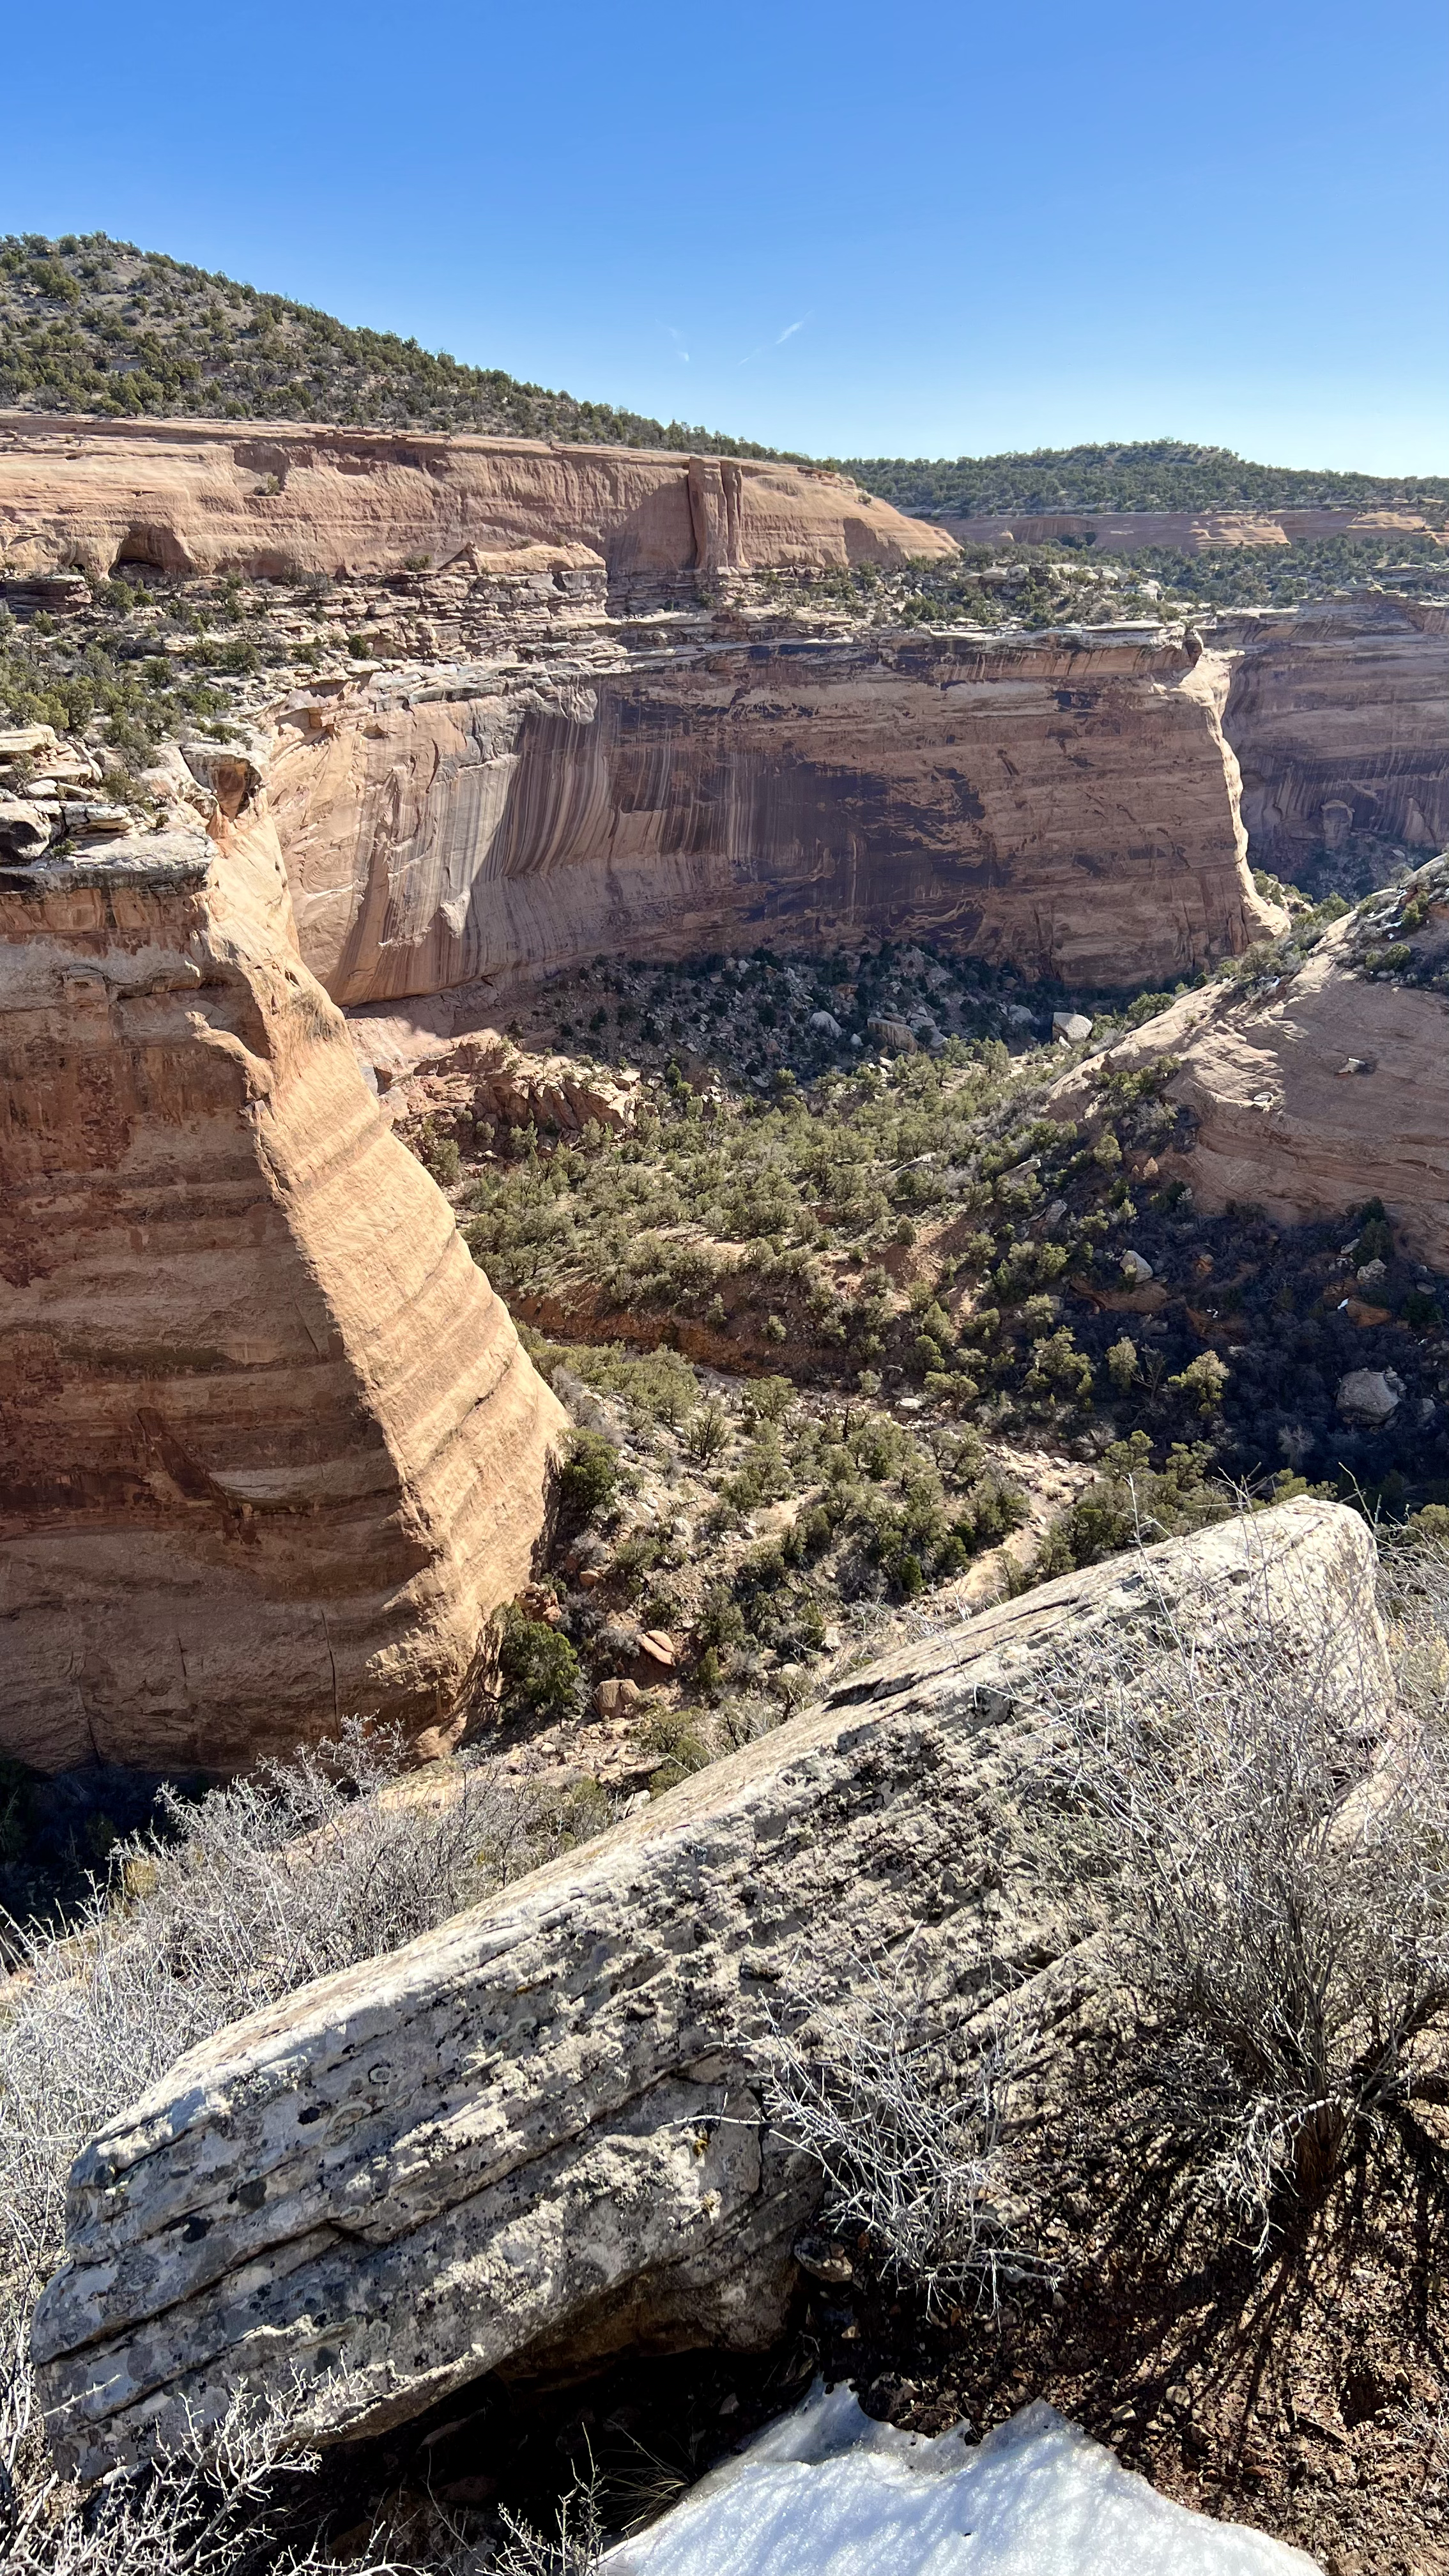 curved, orange canyon walls with green shrubs above and below